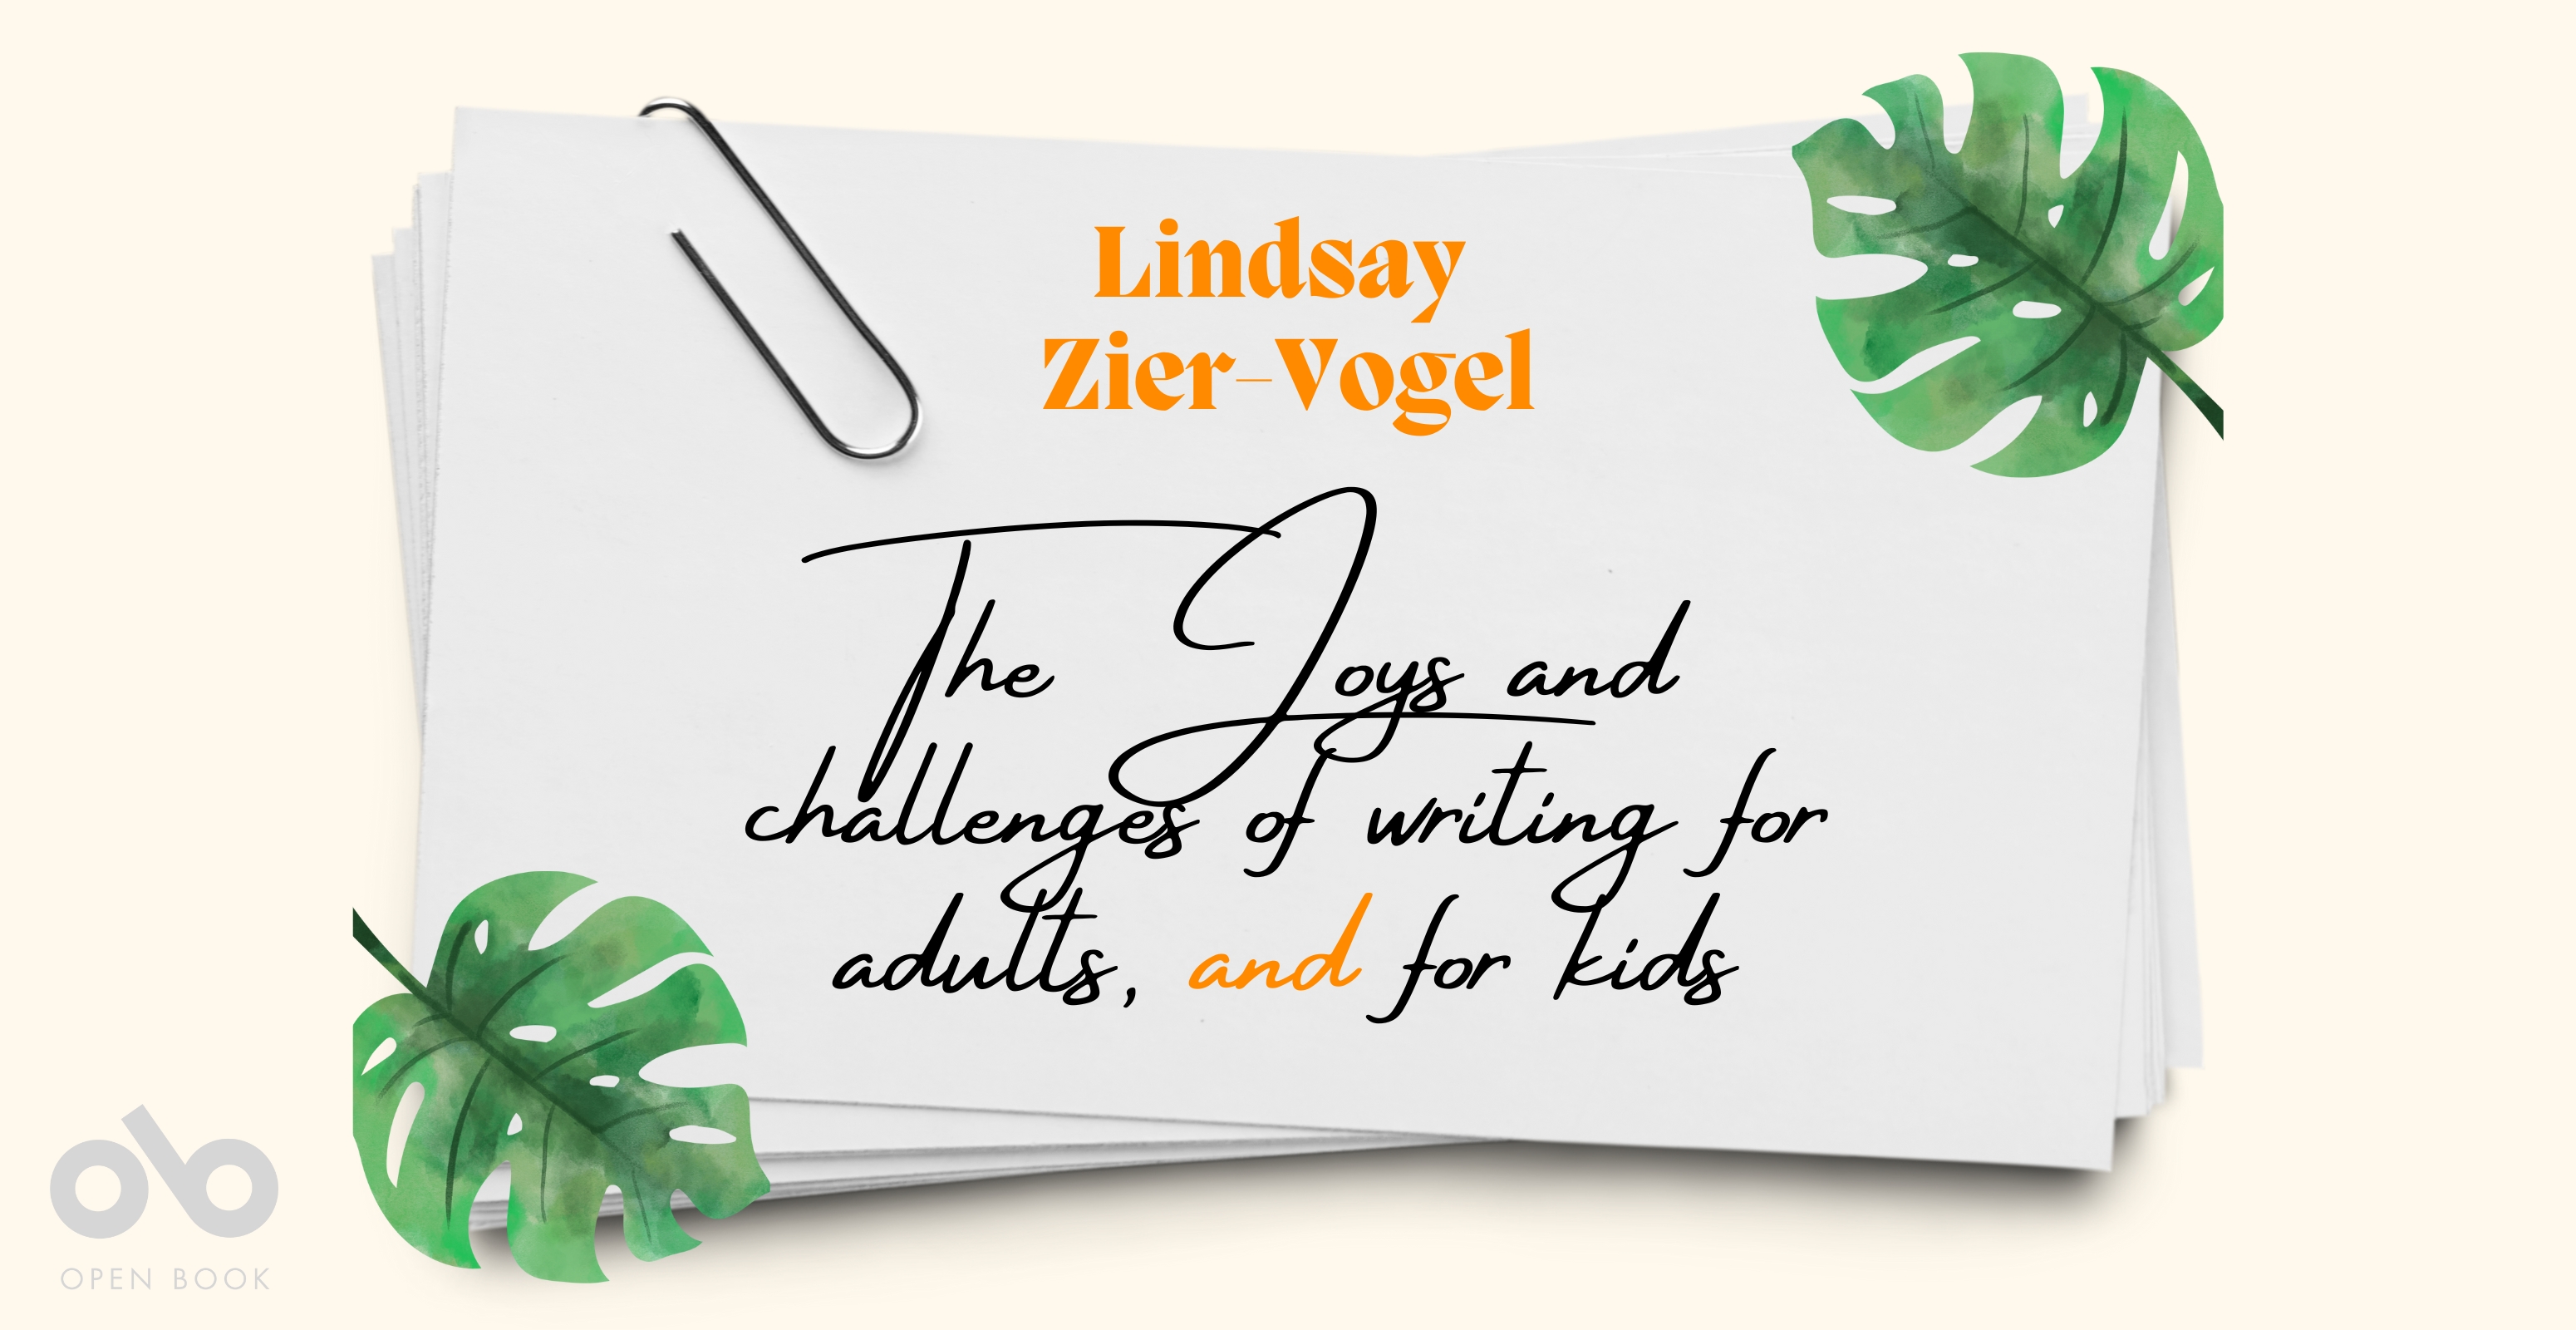 The joys and challenges of writing for adults AND for kids